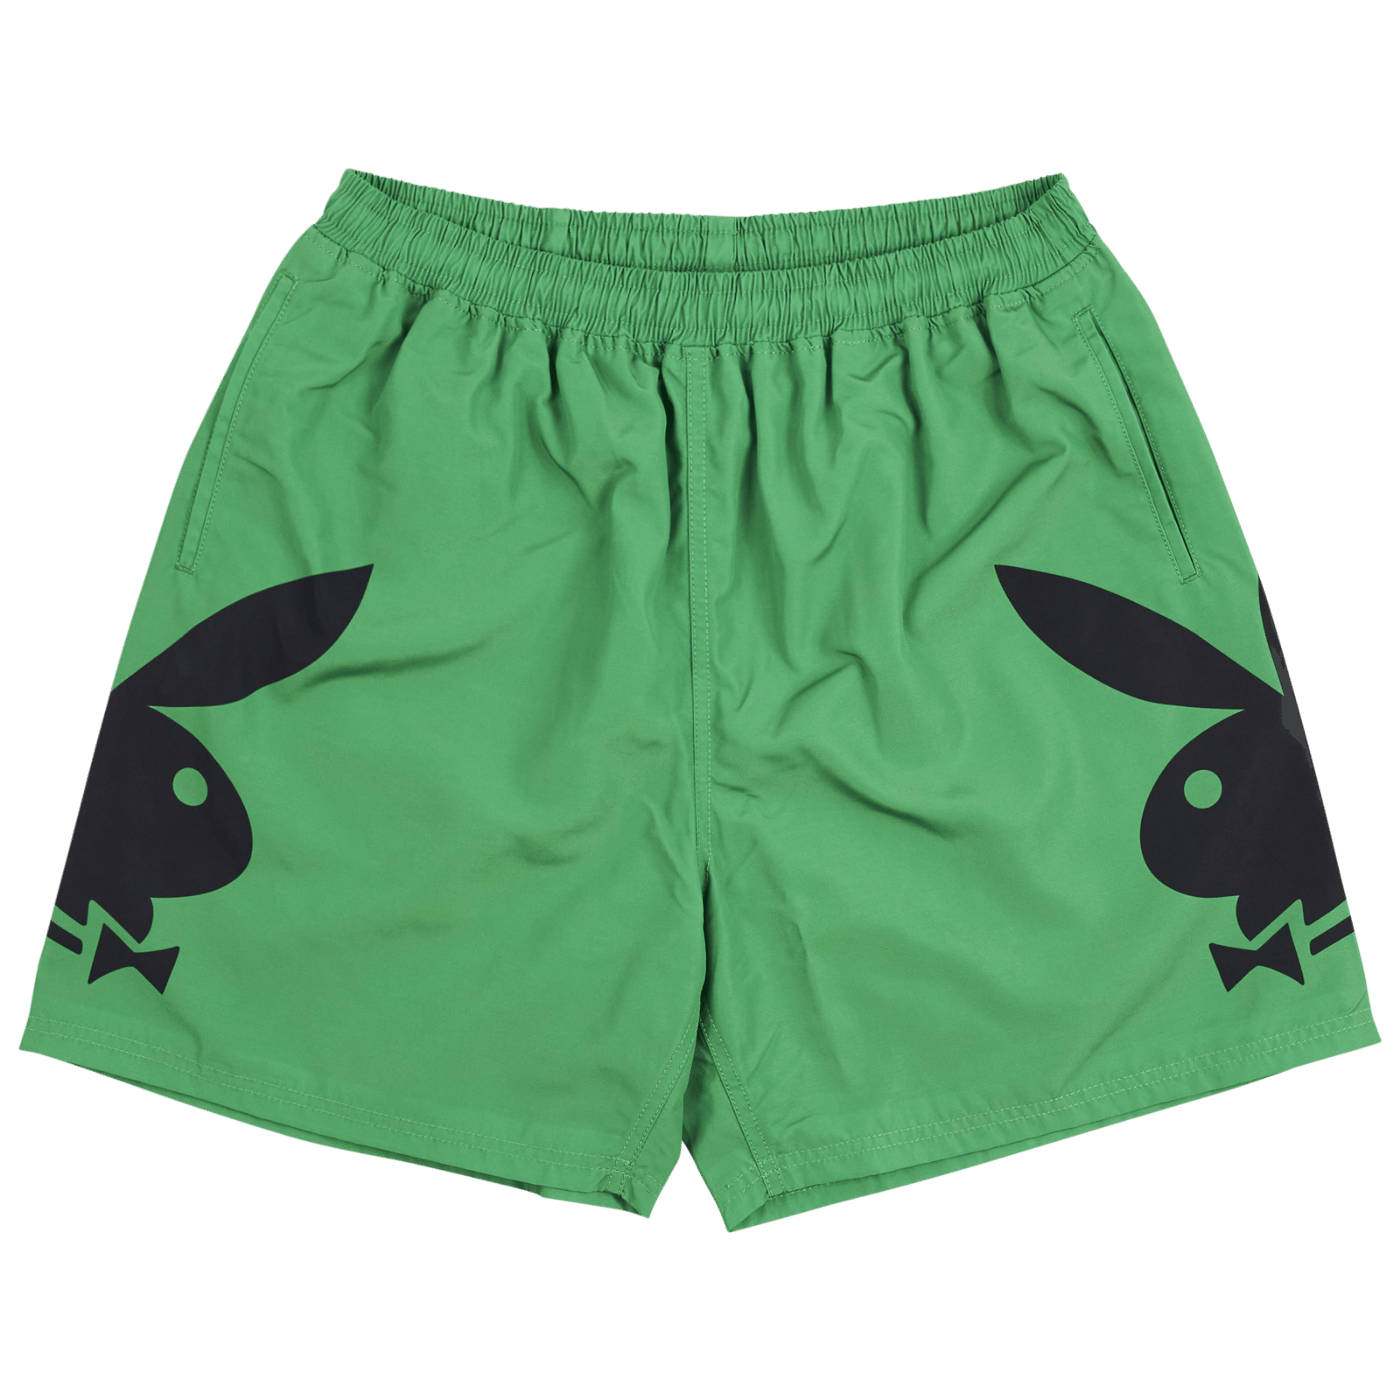 Shop Shorts for Men and Women